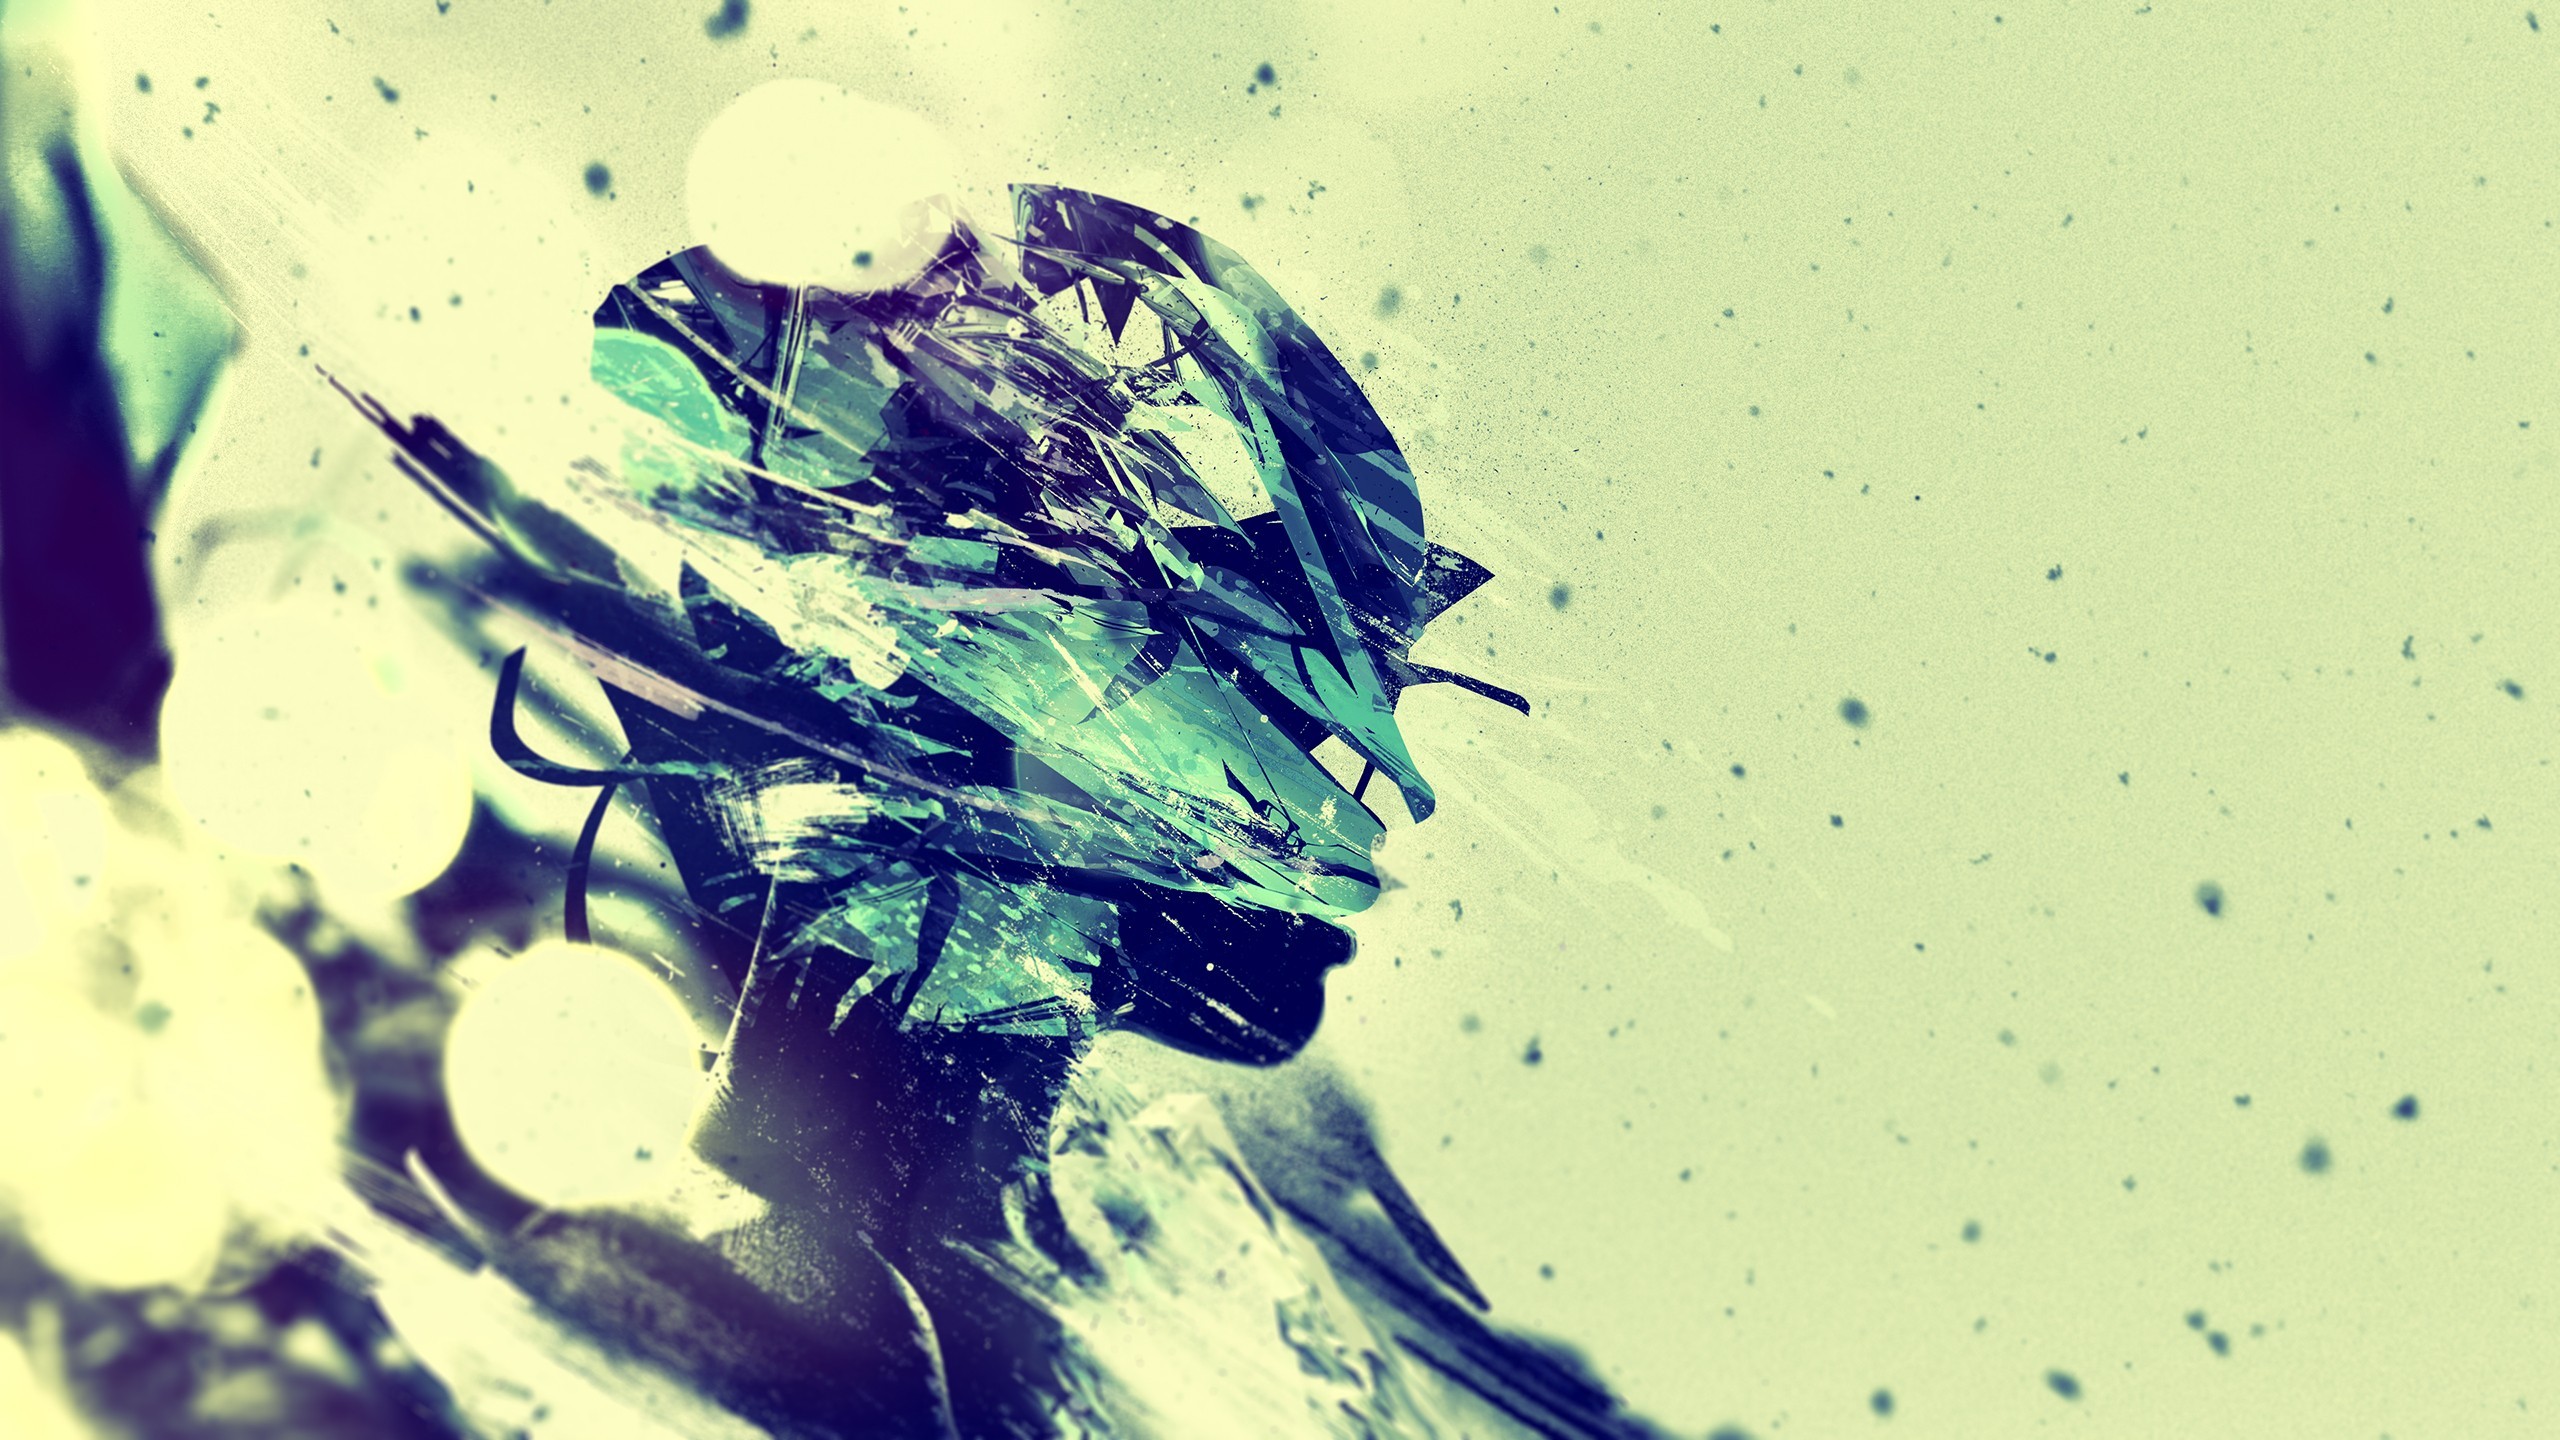 Face Abstract Digital Art Shattered 2560x1440